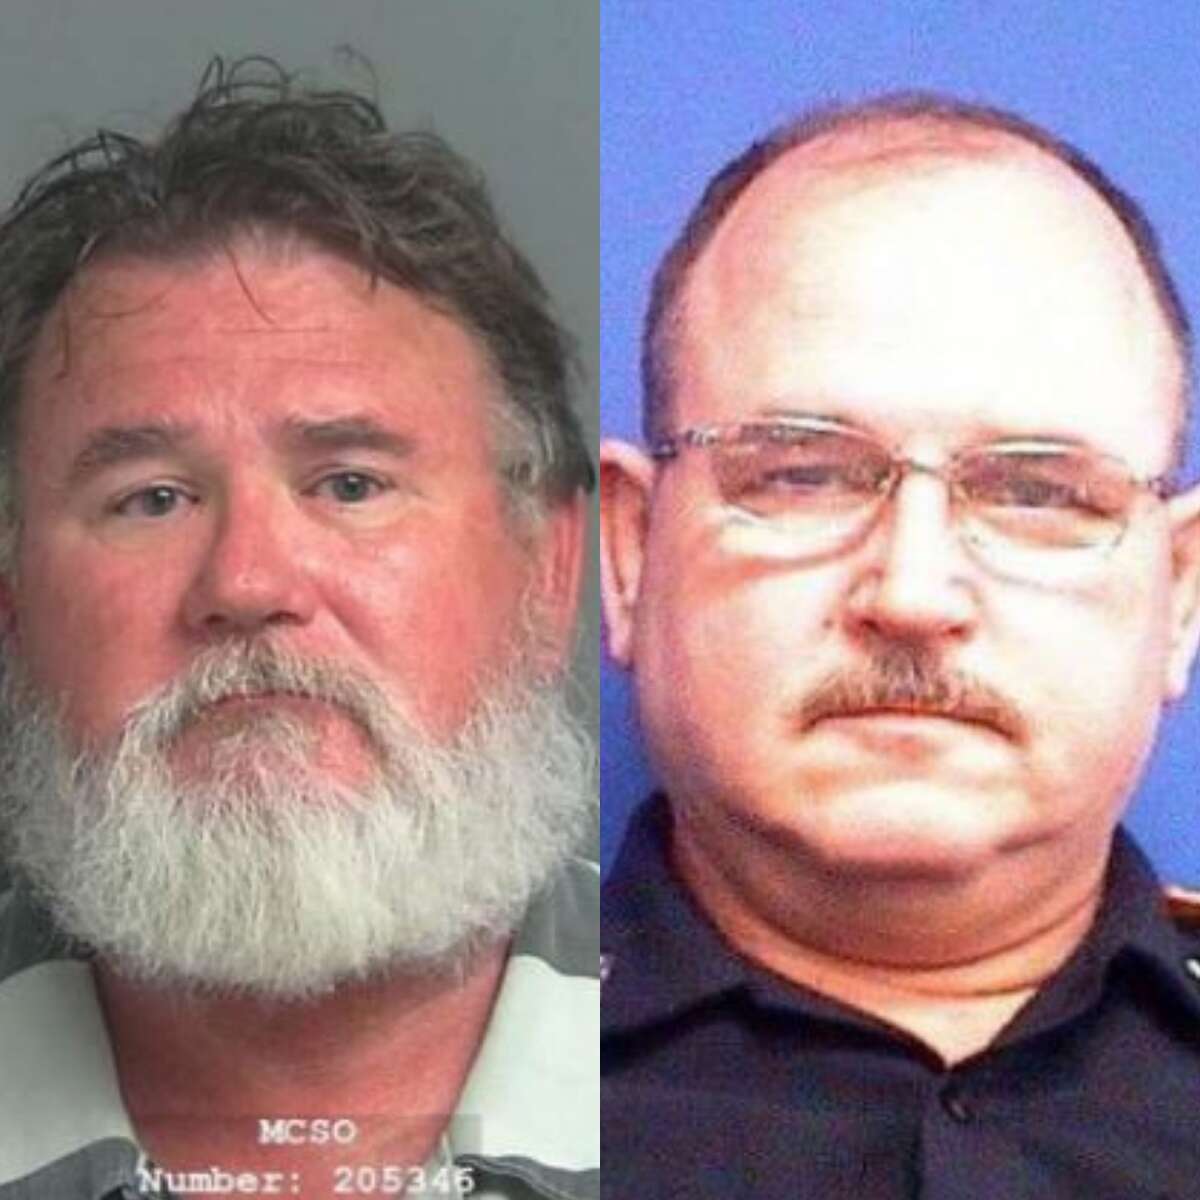 Robert Eugene Lee, 60, was a Stagecoach Police Department officer when on May 25 he killed 57-year-old Rocky Lee, a 26-year veteran with the sheriff's office.